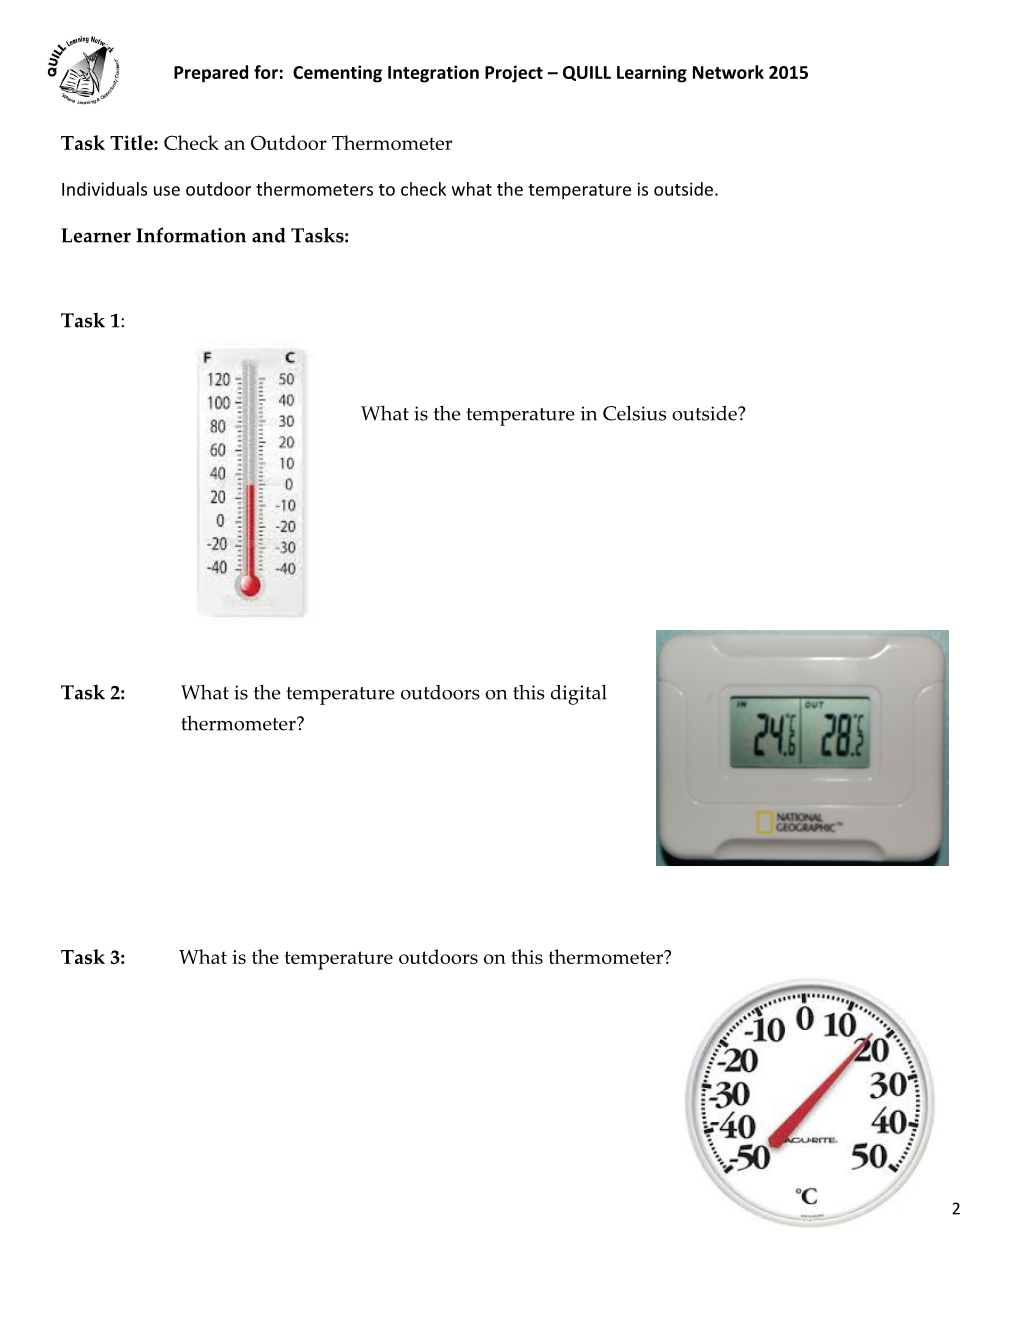 Task Title: Check the Temperature on an Outdoor Thermometer